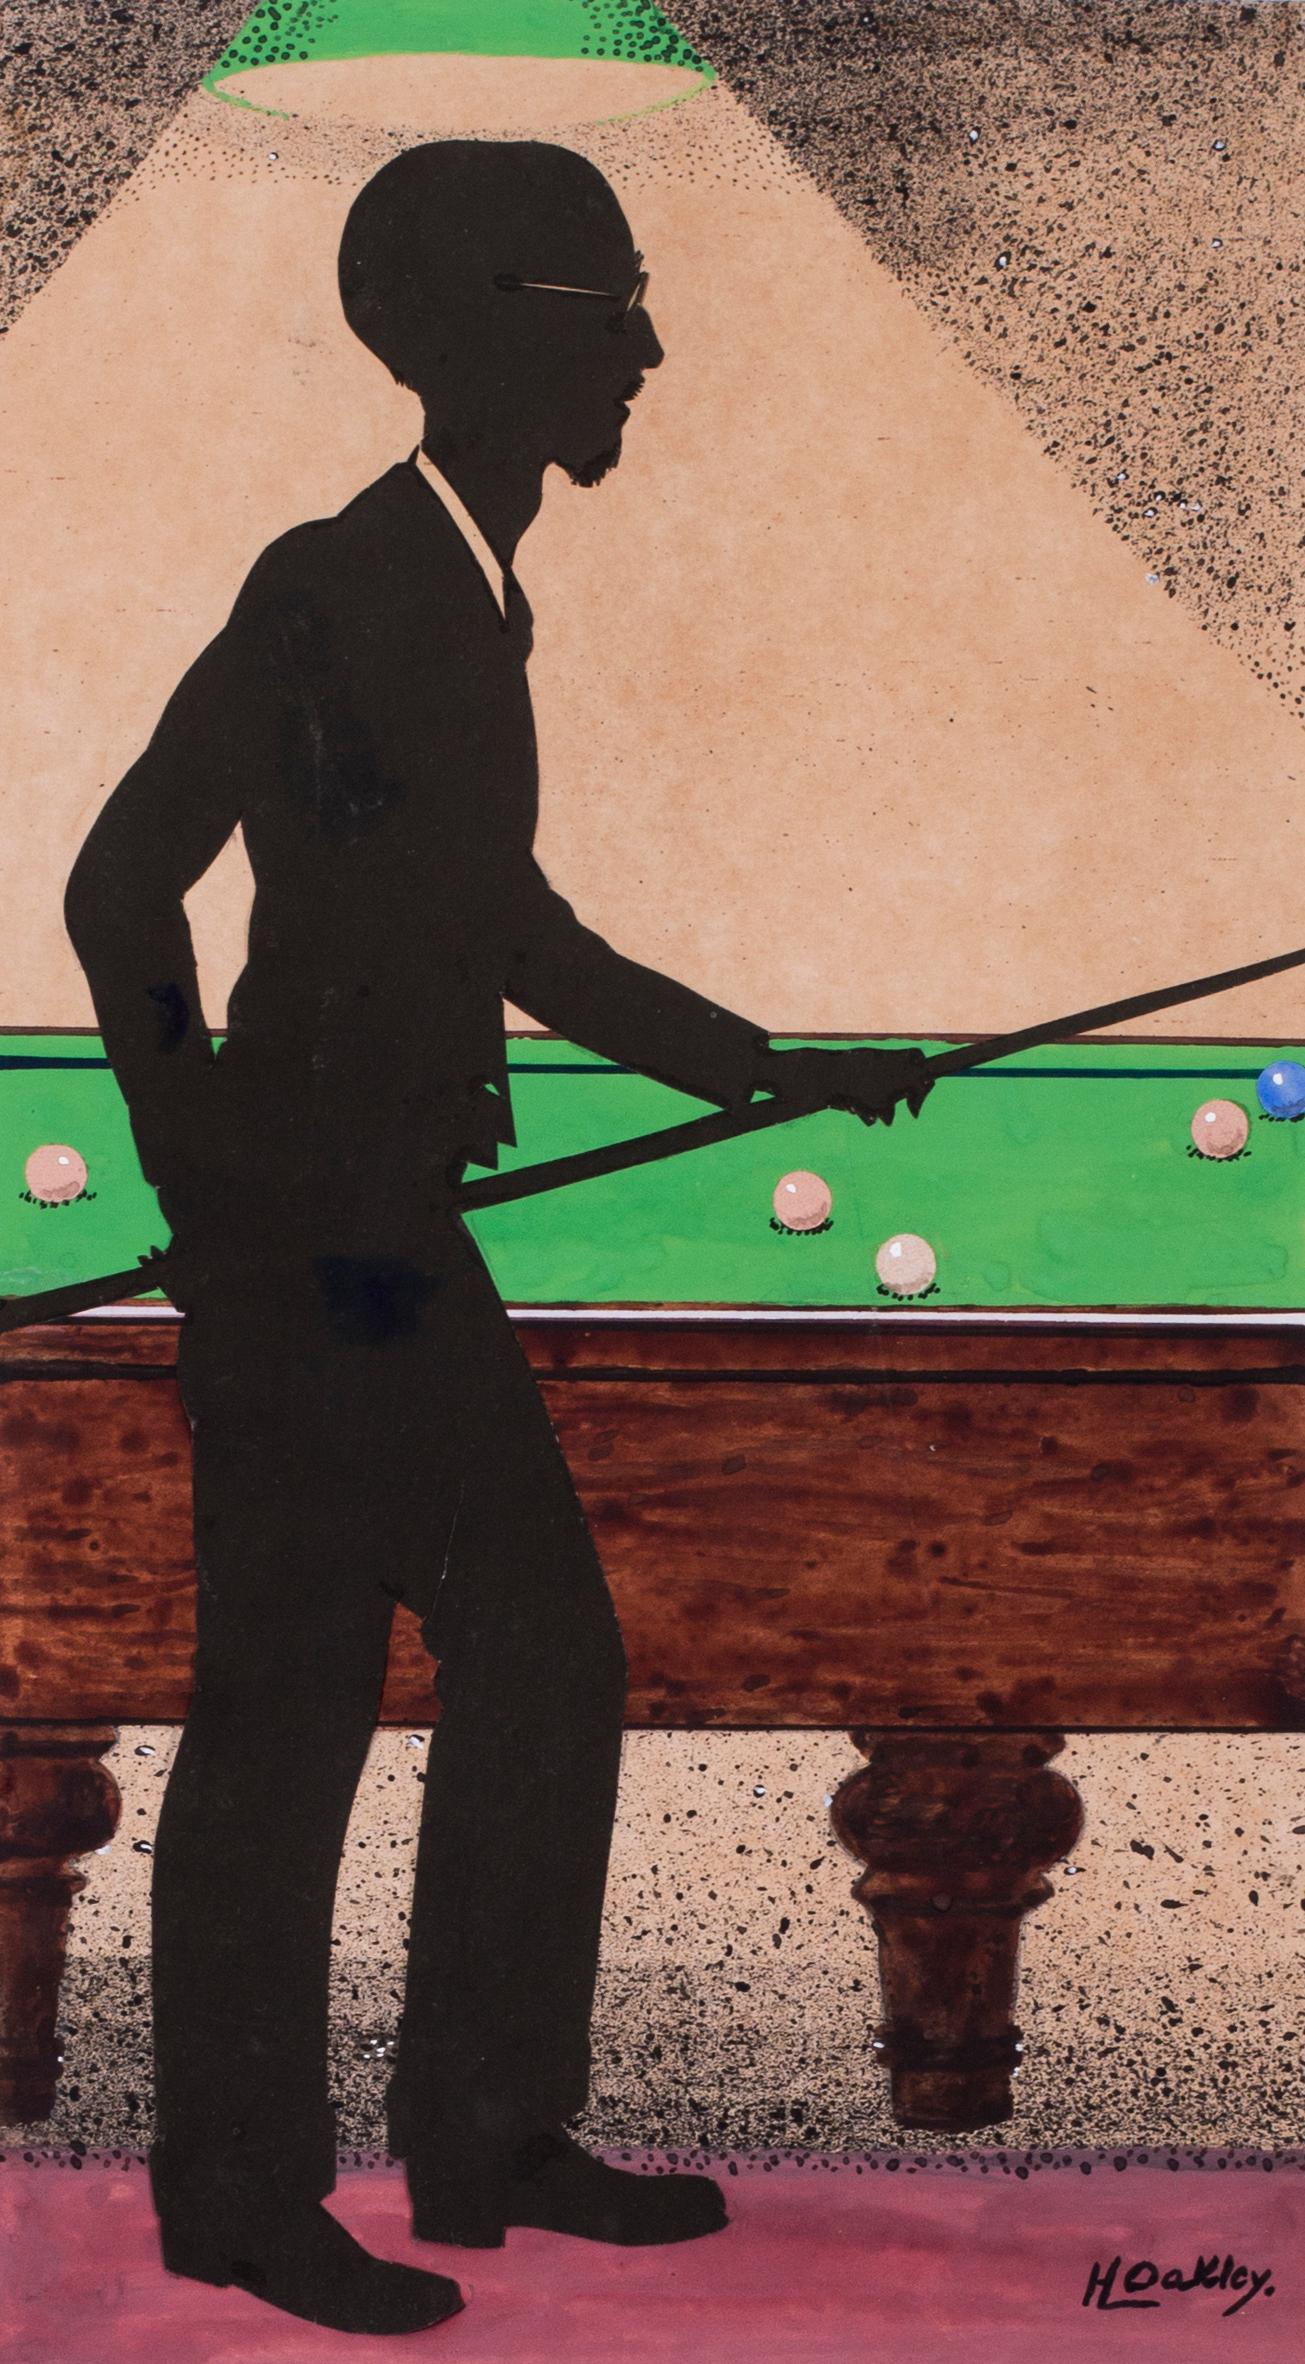 British 20th Century original watercolour painting of a snooker / pool player - Painting by Unknown